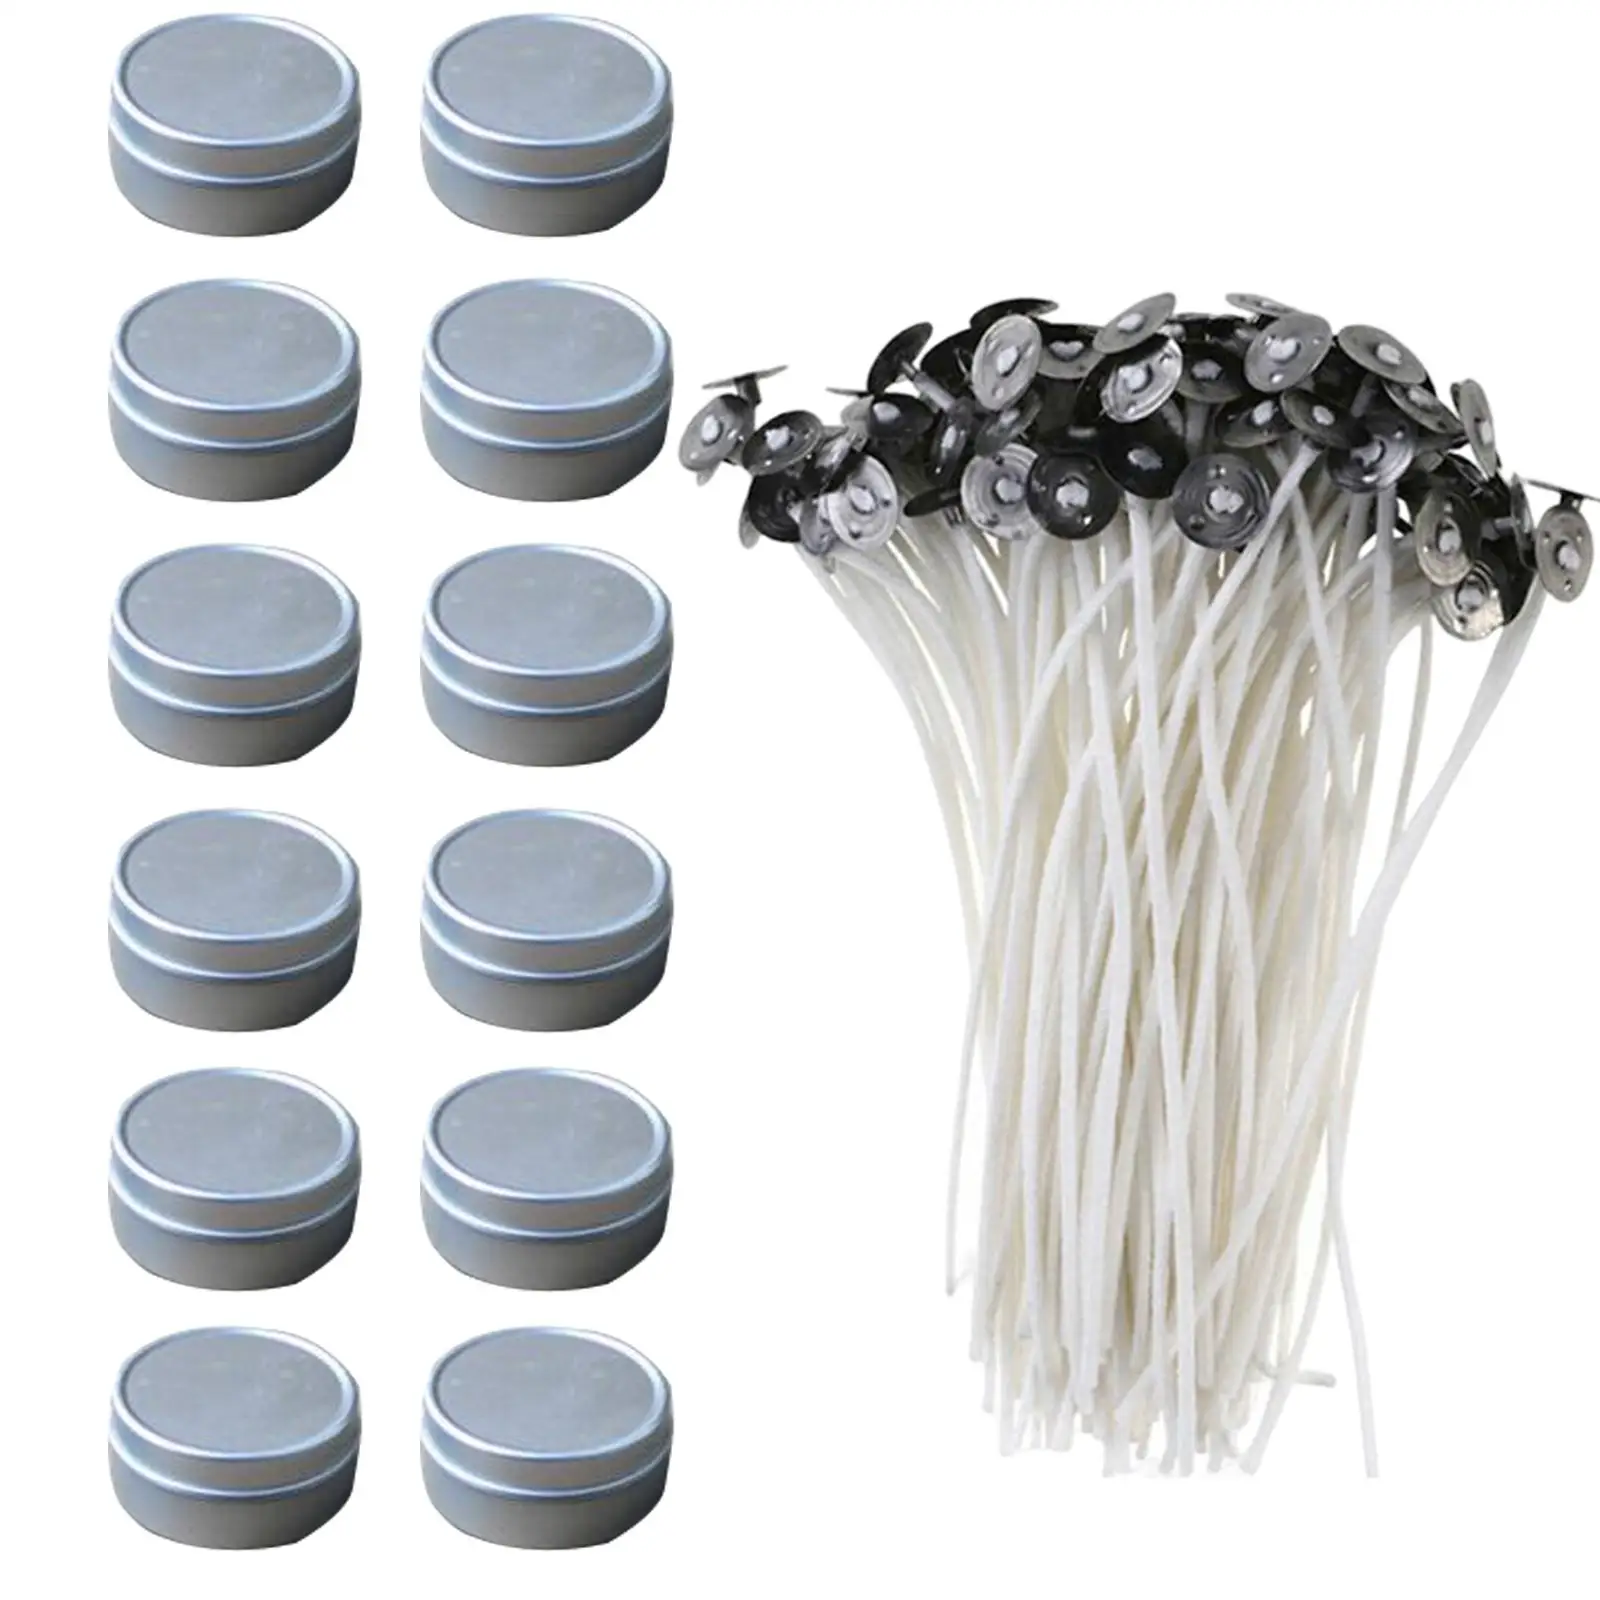 100x Candle Wicks Storage Box Candle DIY Pretabbed Wicks with 12x Empty Candle Tins for Candle Making